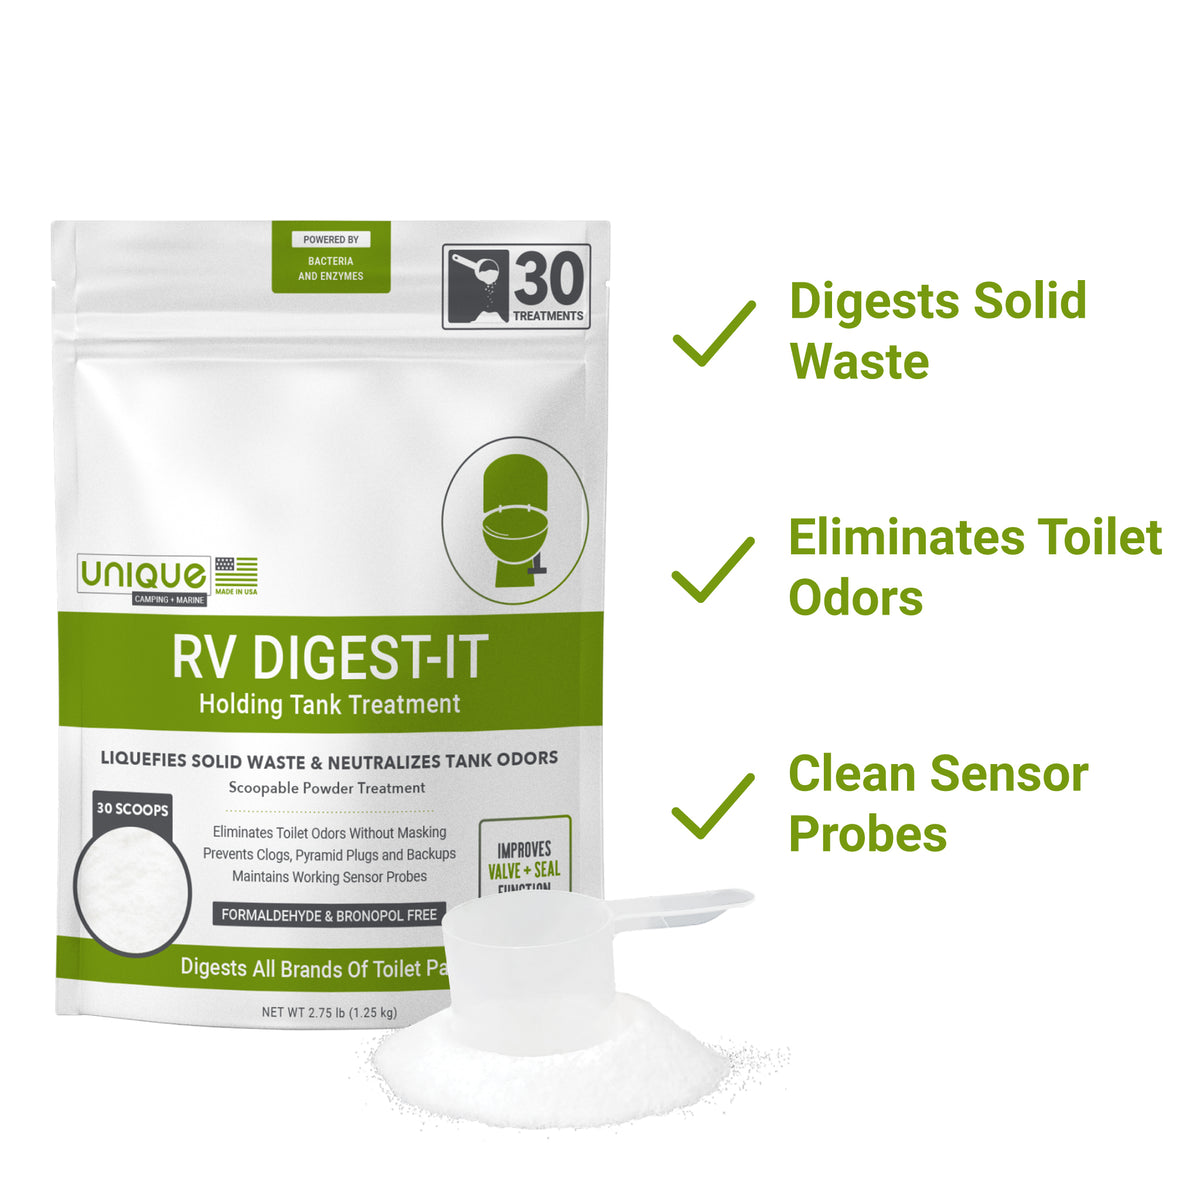 RV Digest-It 30 Treatment Powder Formulated with trust- the best RV holding tank treatment. Breakdown solid waste and reduce odors for dry campers.